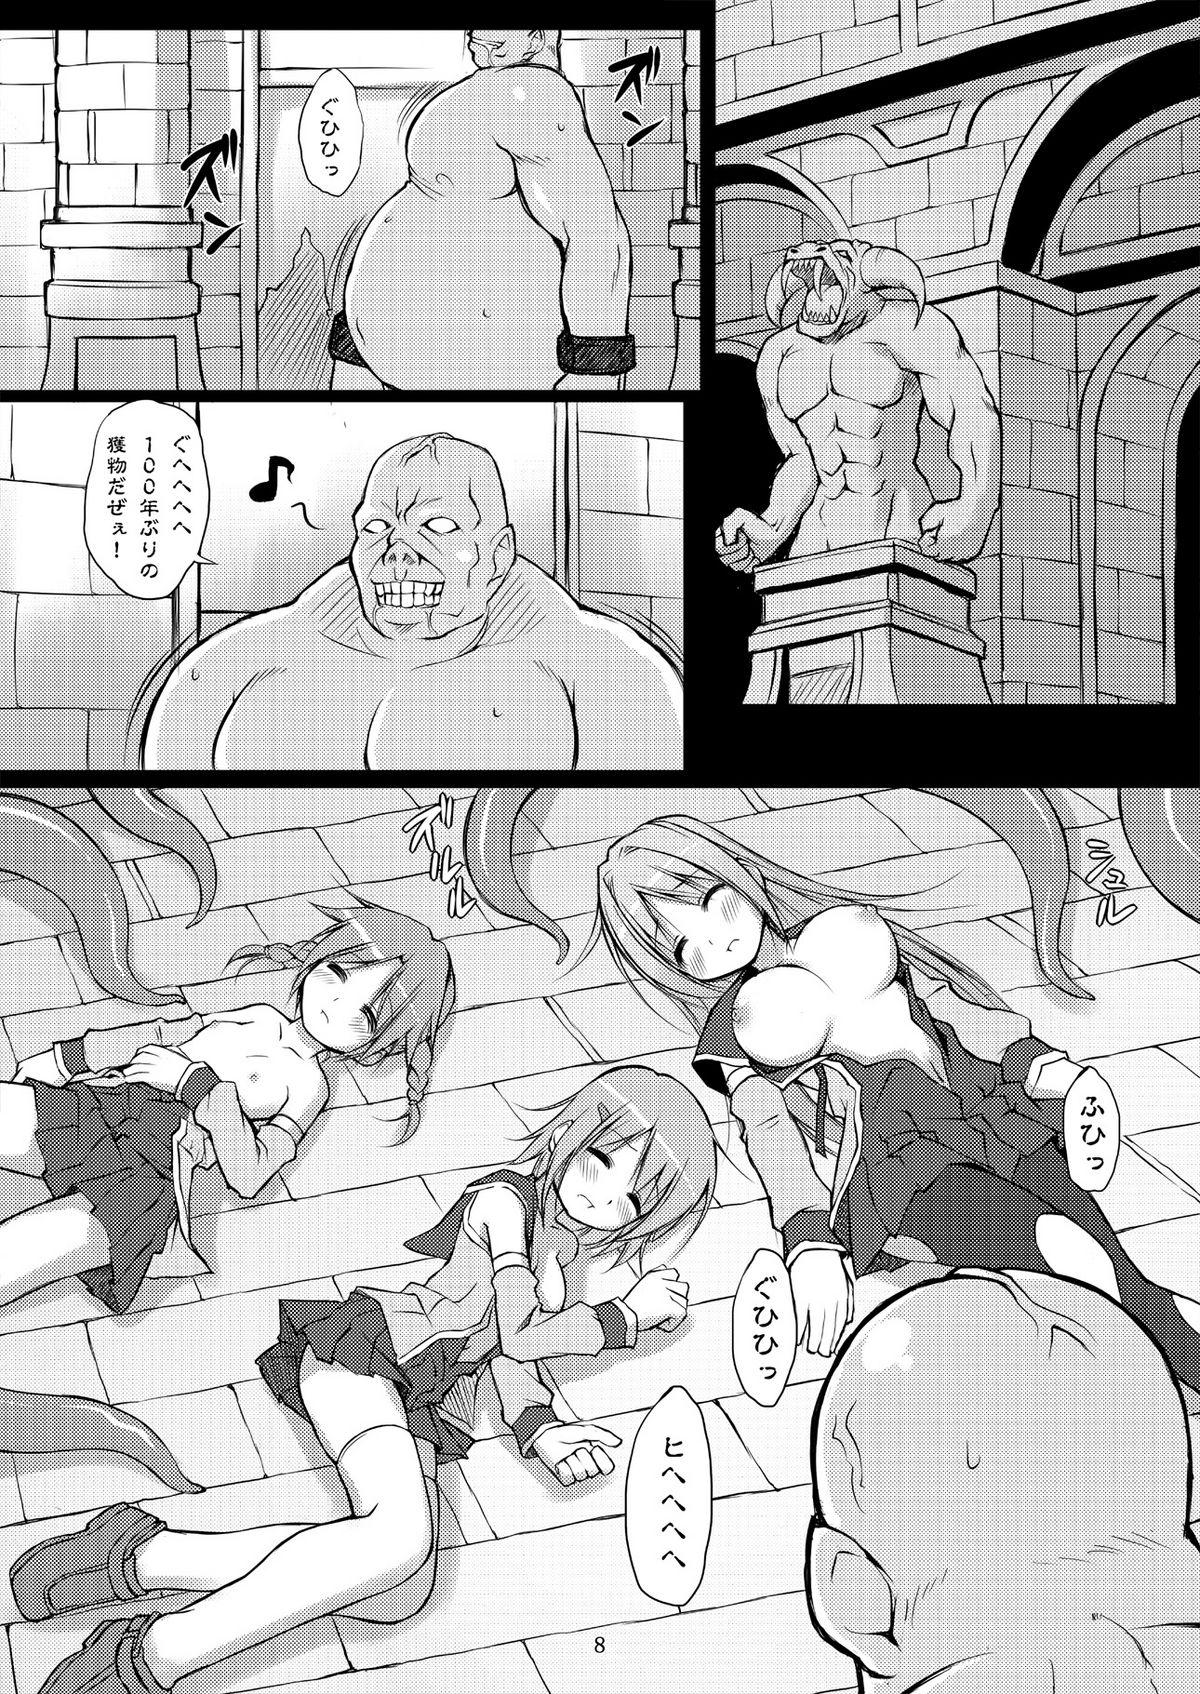 Pawg 魔法戦士触獄に堕つ～獄卒の洗礼～ Gay - Page 8